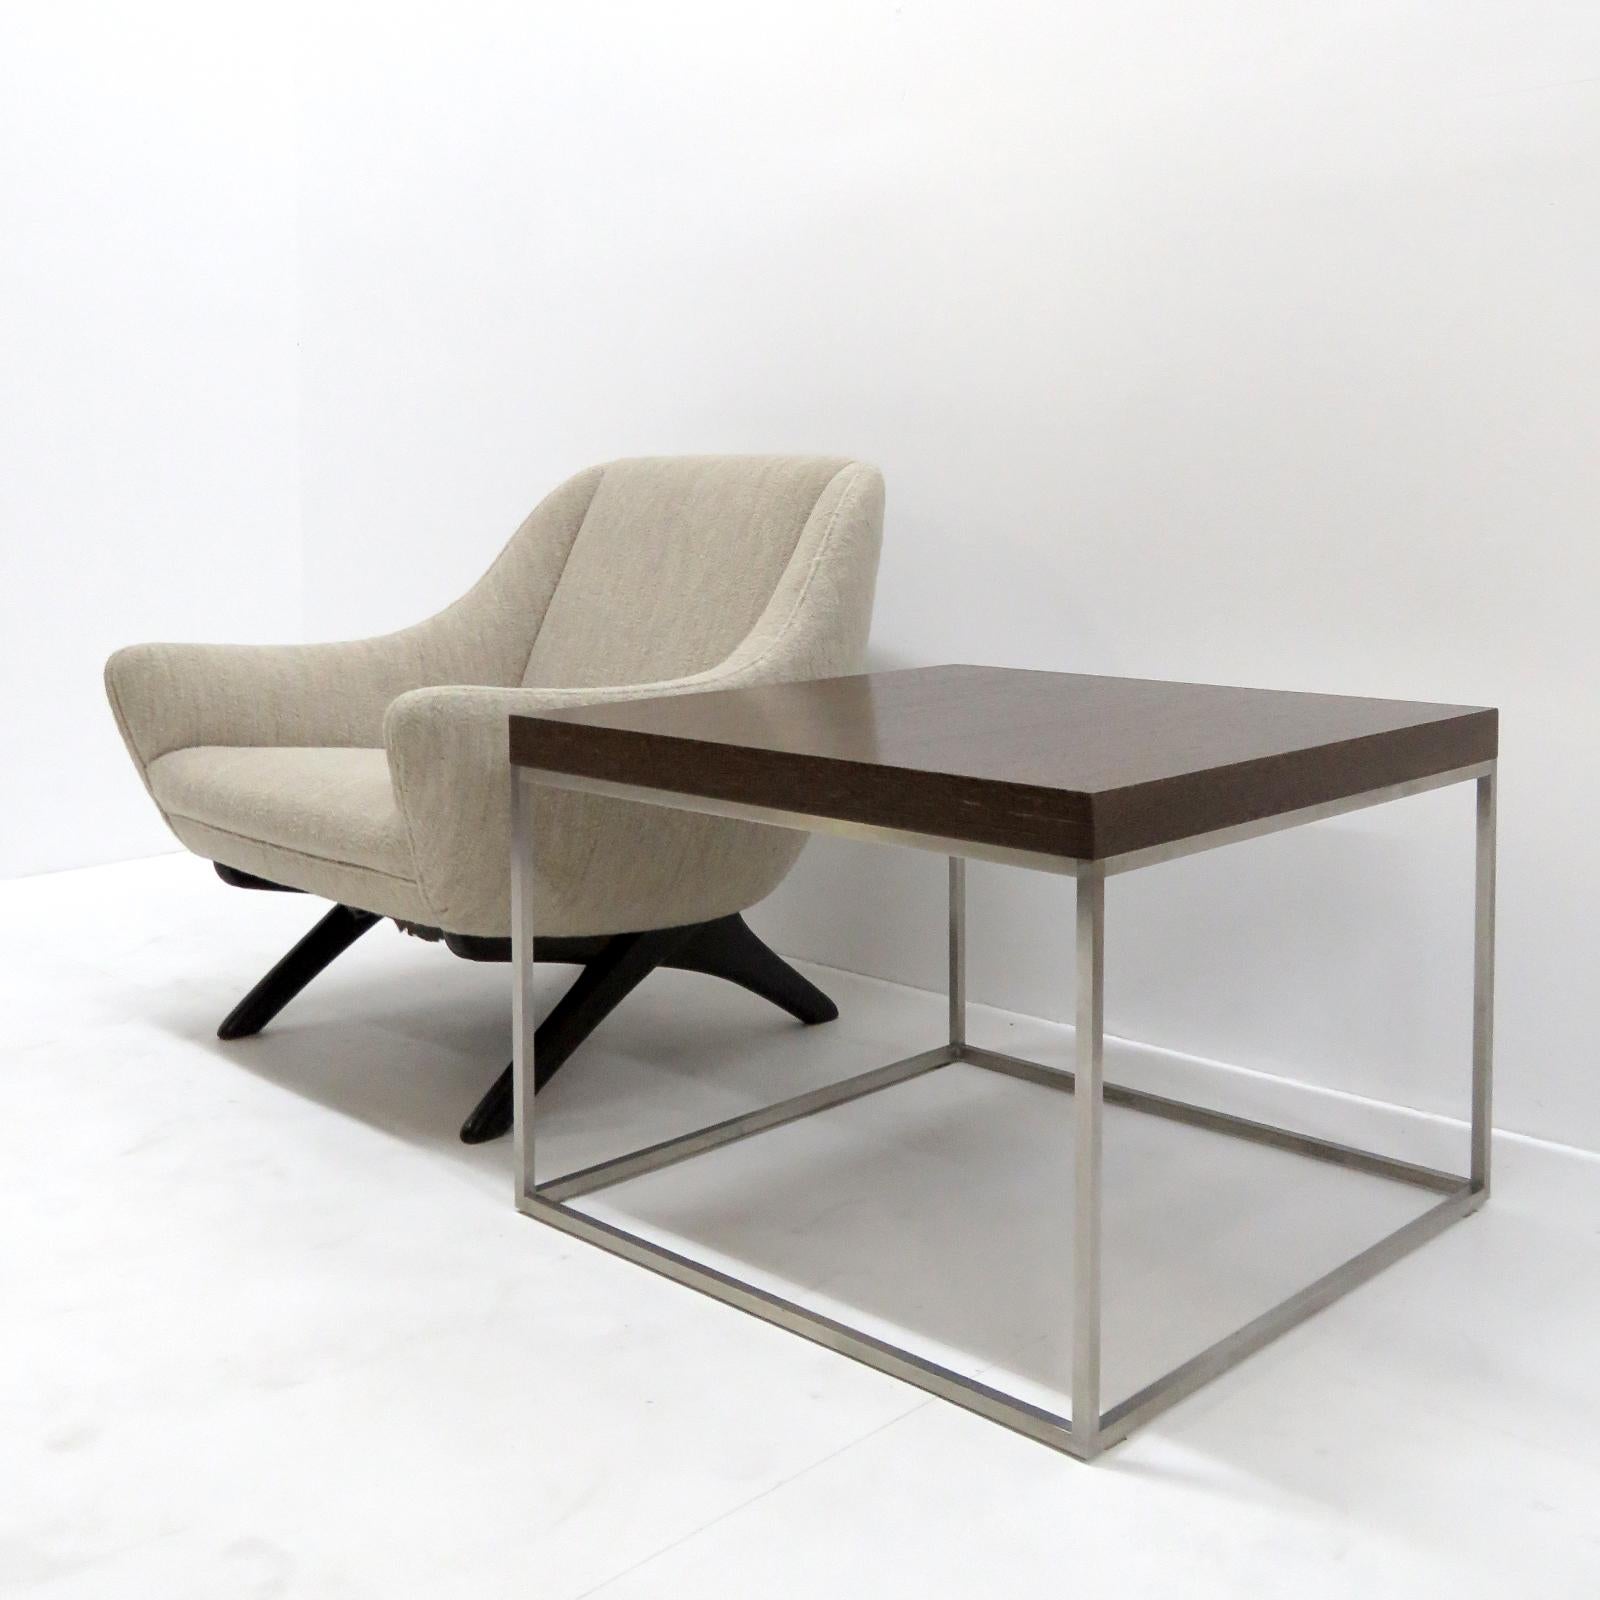 Paolo Piva 'Madison Square' Coffee Table 3